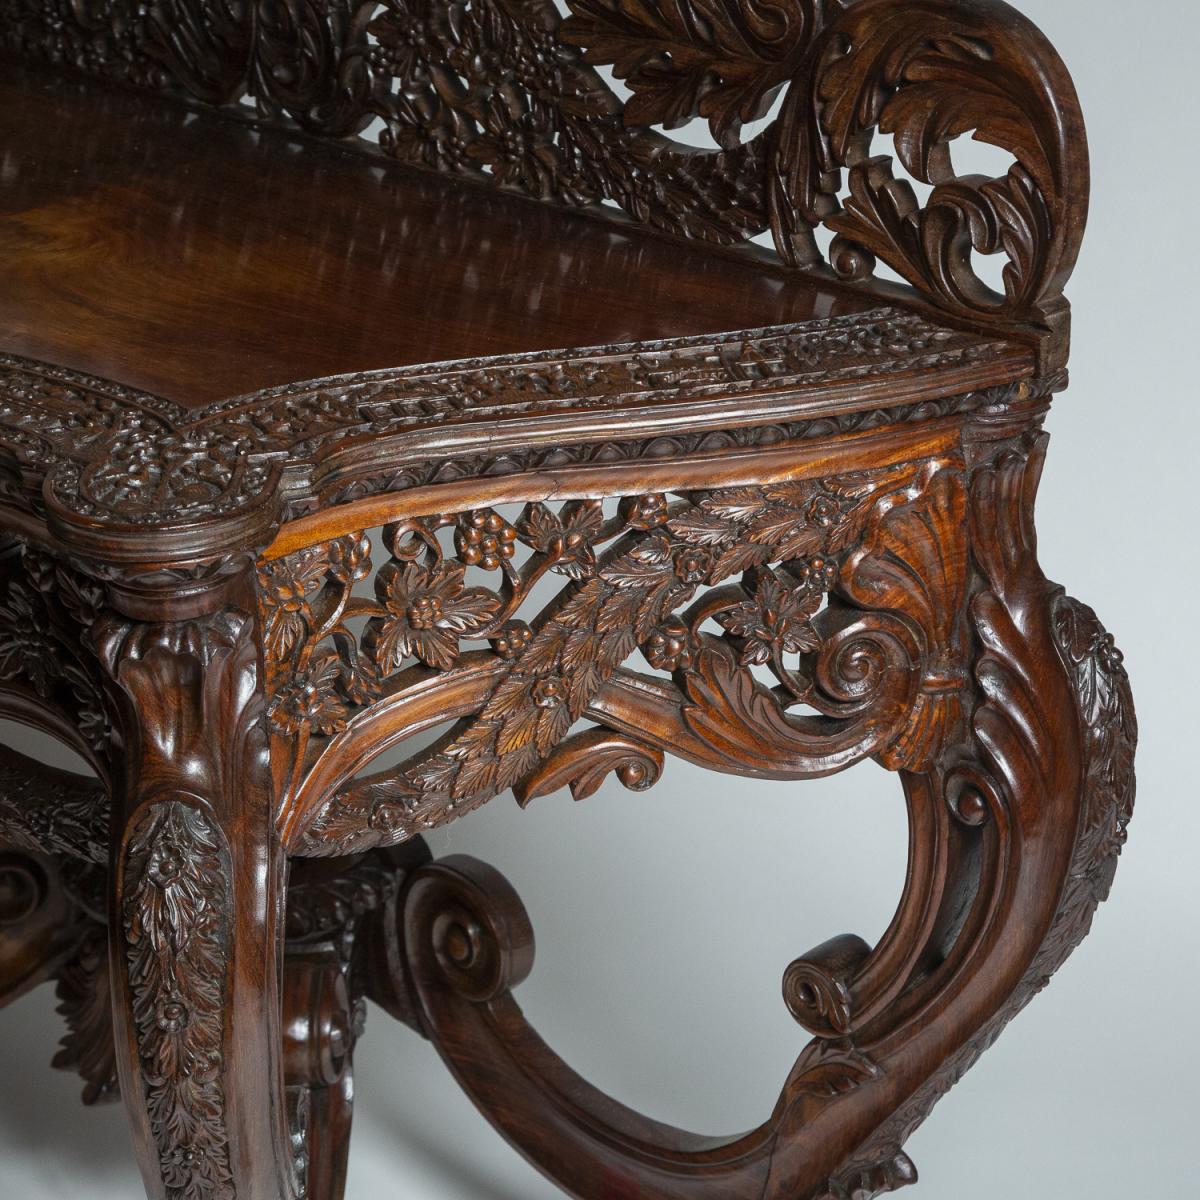 Late 19th century highly carved teak console table